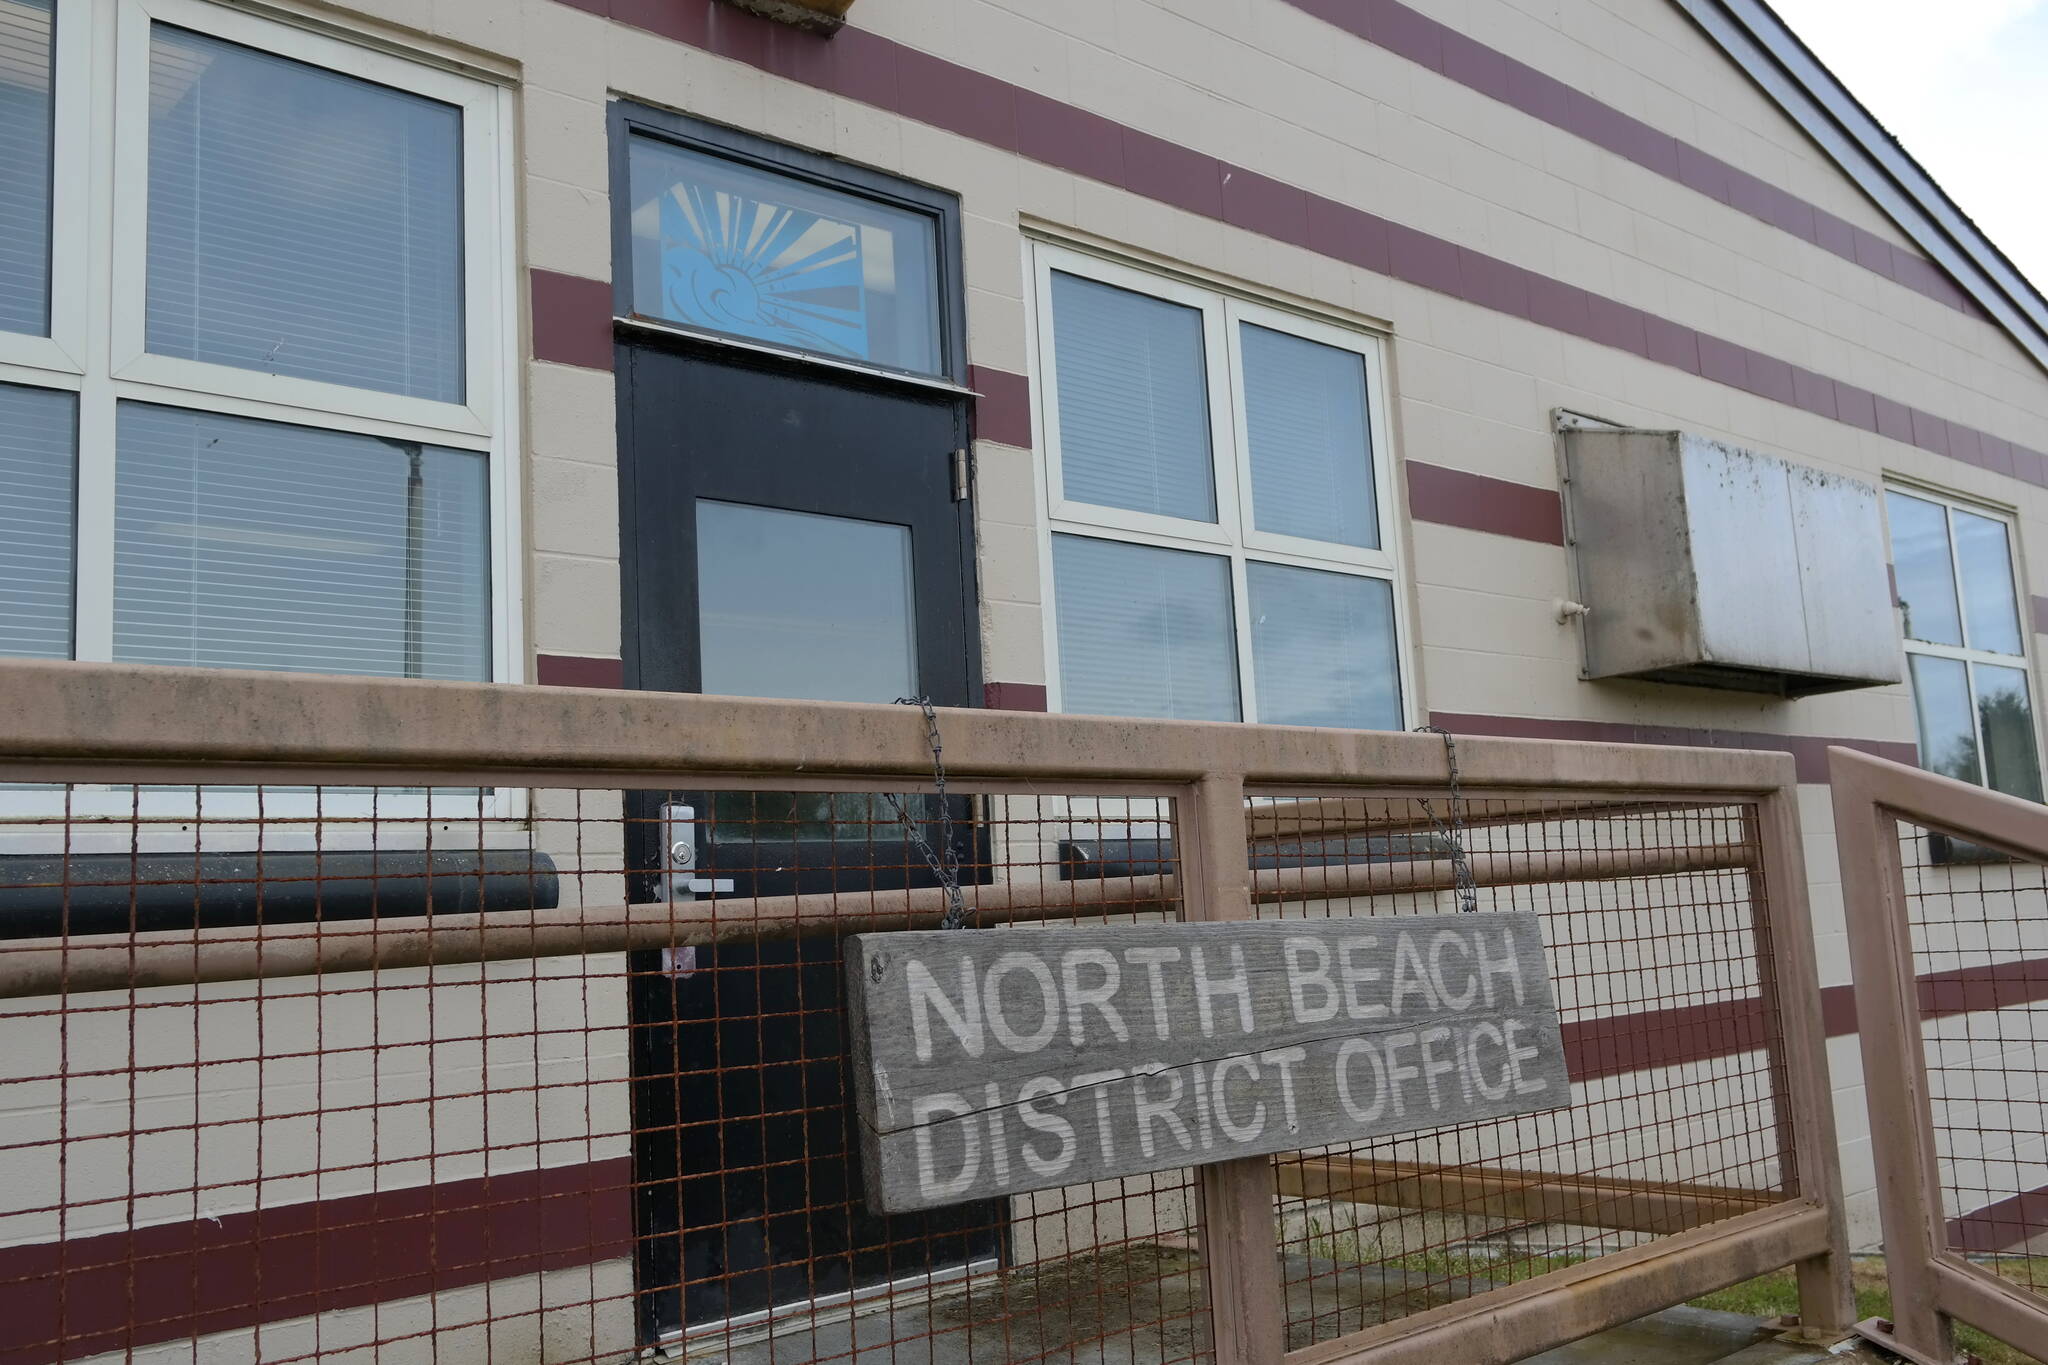 The Daily World file photo
North Beach school district voters rejected a proposed levy that would’ve funded roof repairs and athletic field improvements at the combined middle school and high school.